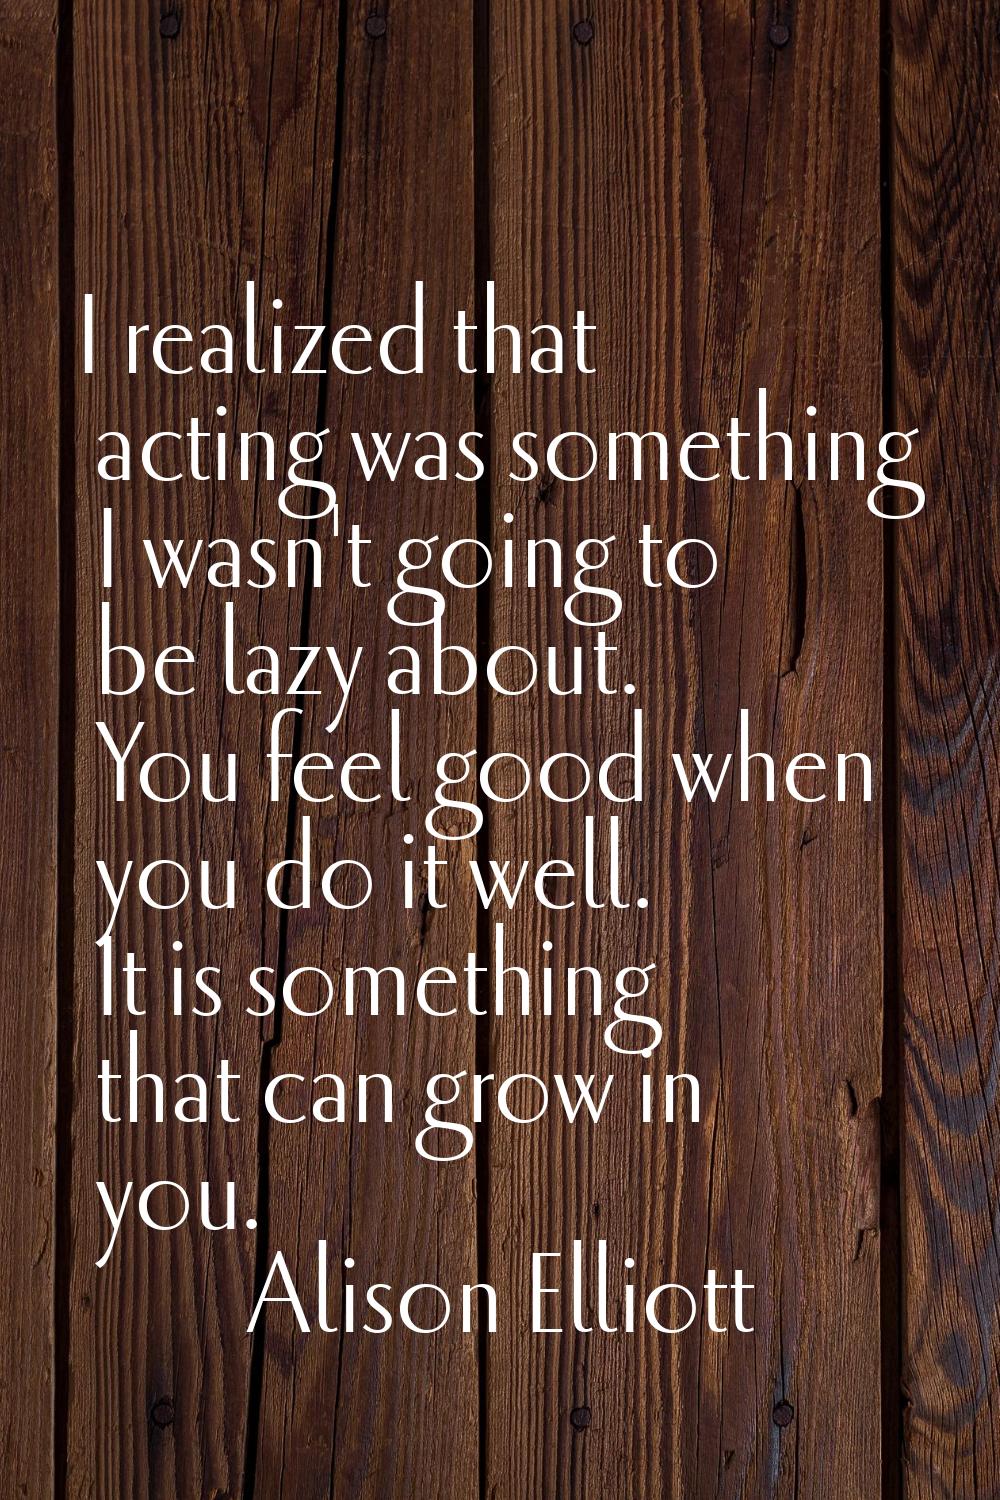 I realized that acting was something I wasn't going to be lazy about. You feel good when you do it 